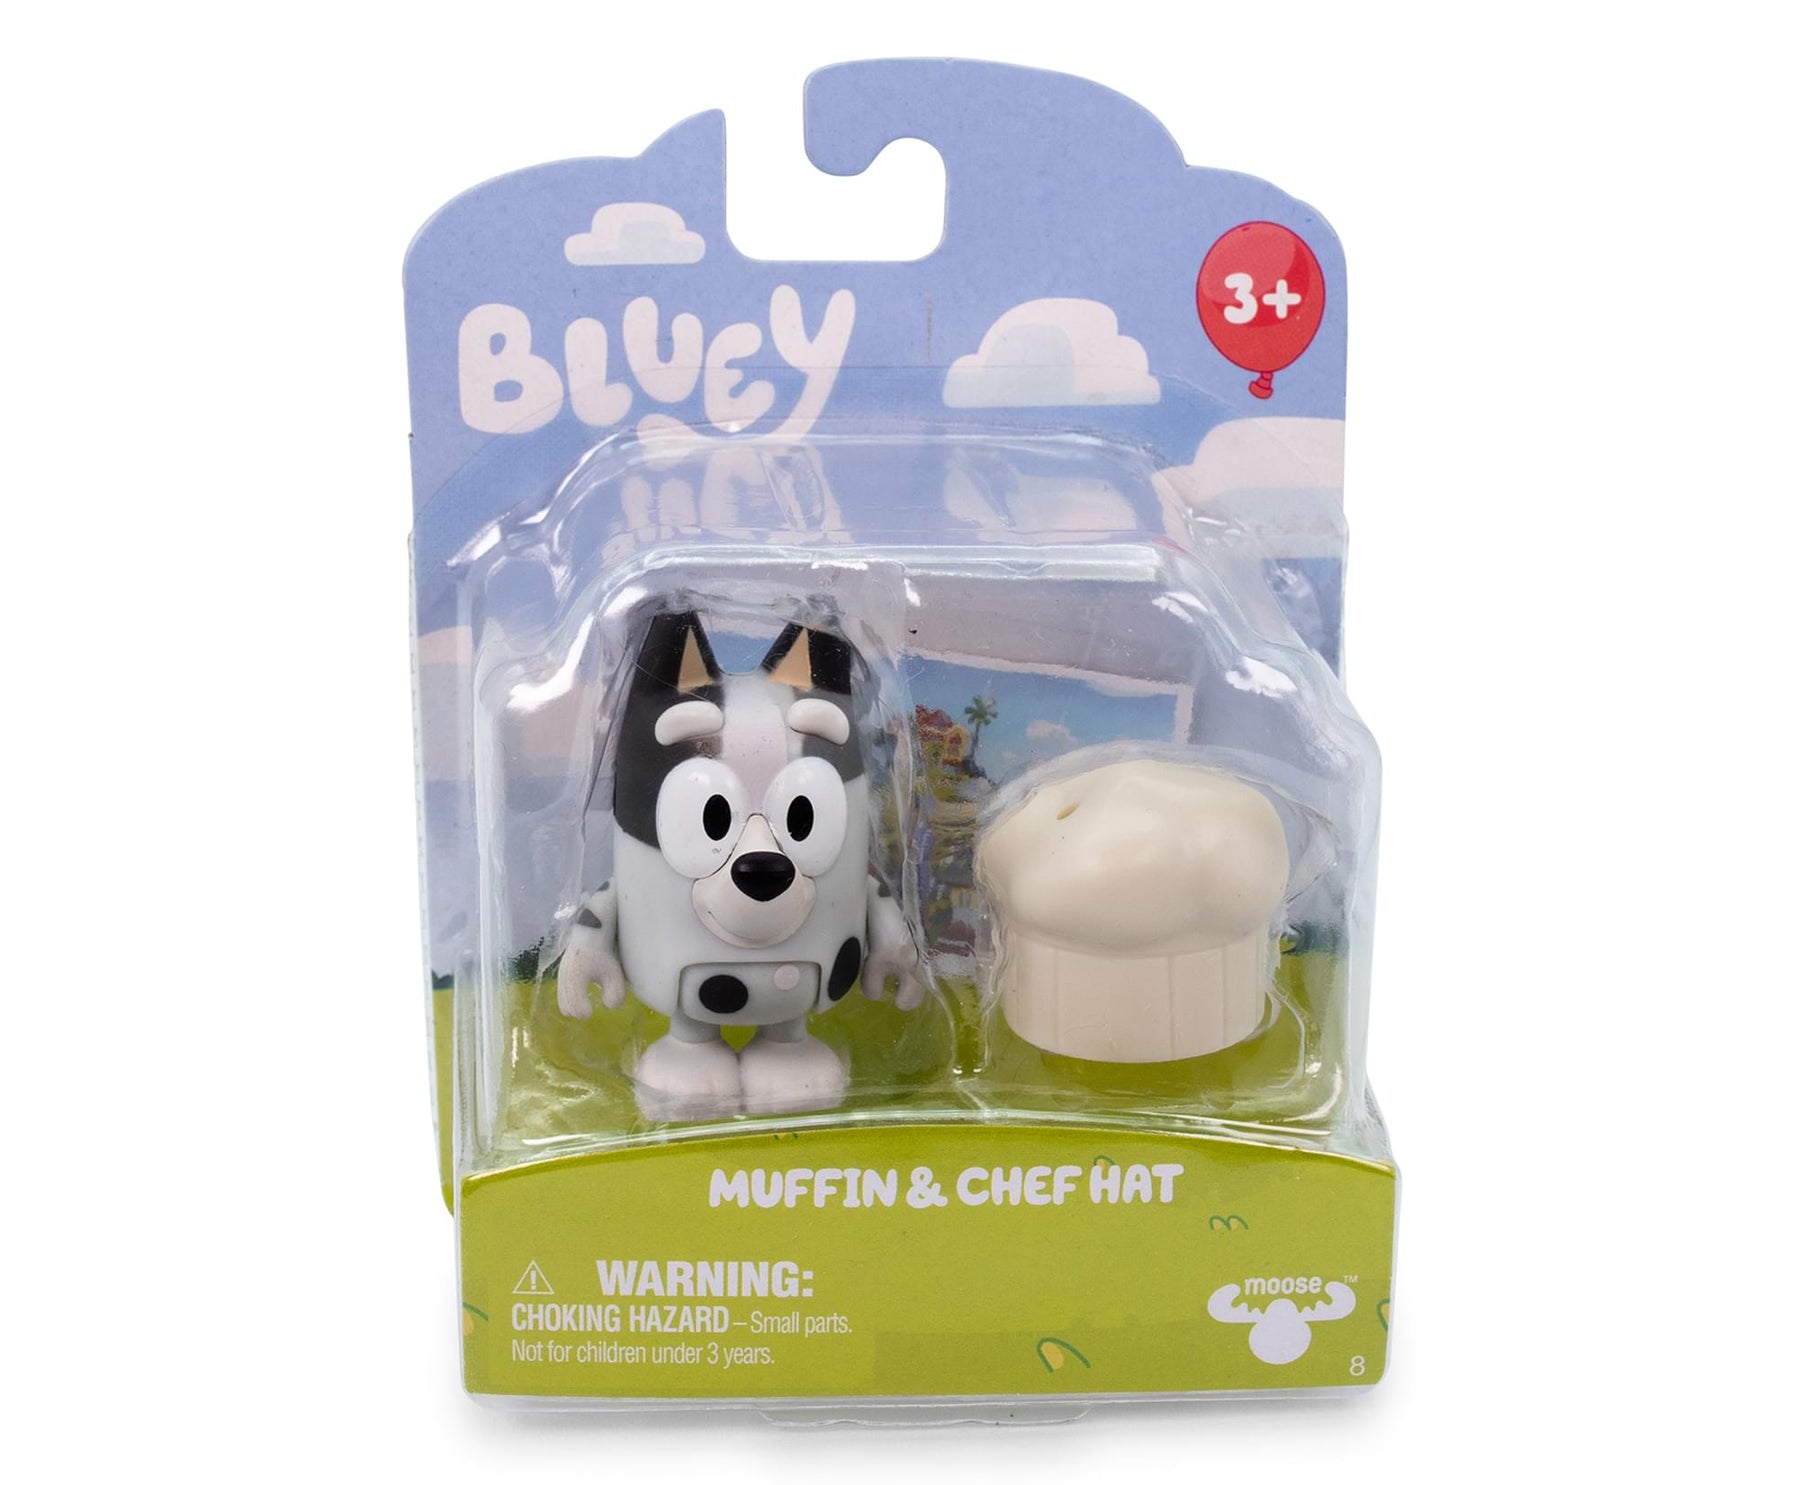 Bluey Action Figure Story Starter Pack | Muffin & Chef Hat